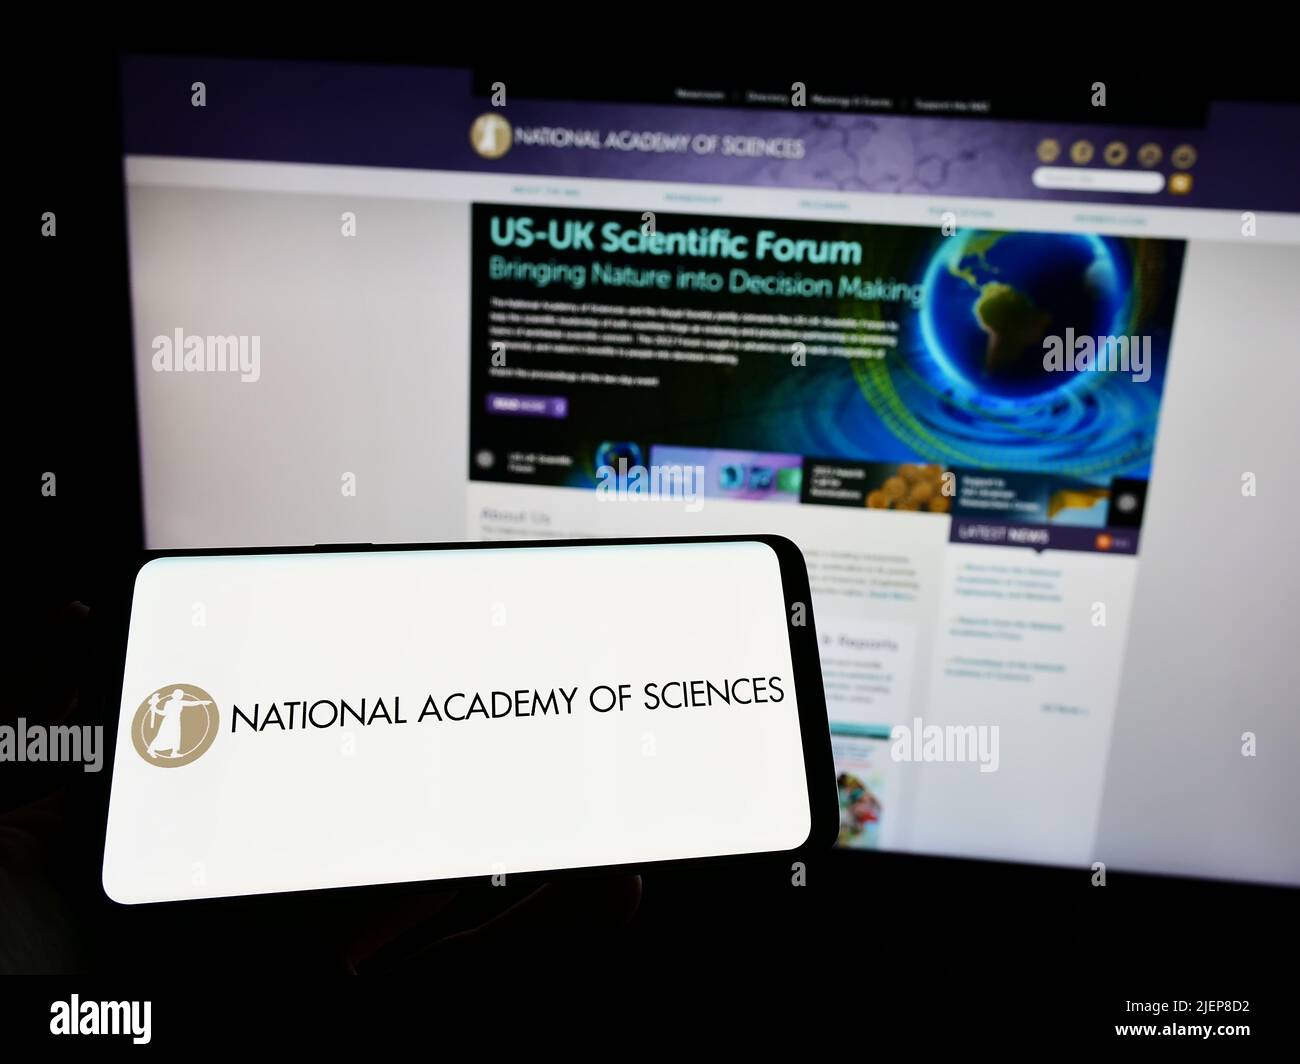 Person holding smartphone with logo of National Academy of Sciences (NAS) on screen in front of website. Focus on phone display. Stock Photo